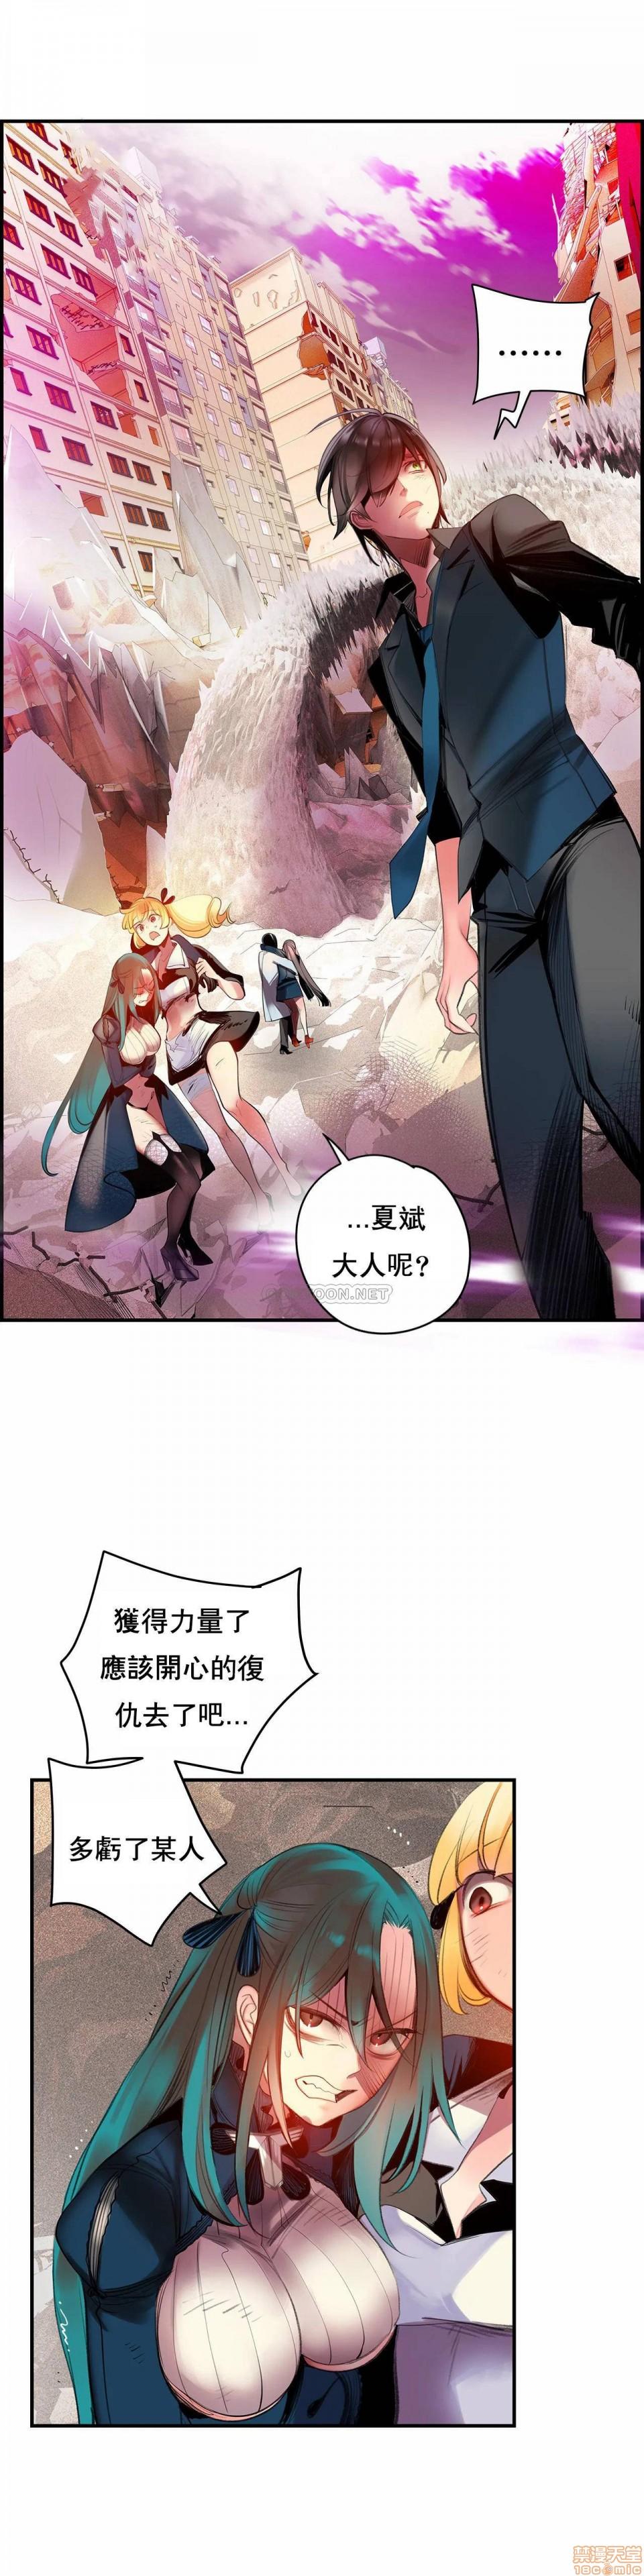 [Juder] Lilith`s Cord (第二季) Ch.77-93 end [Chinese] 140